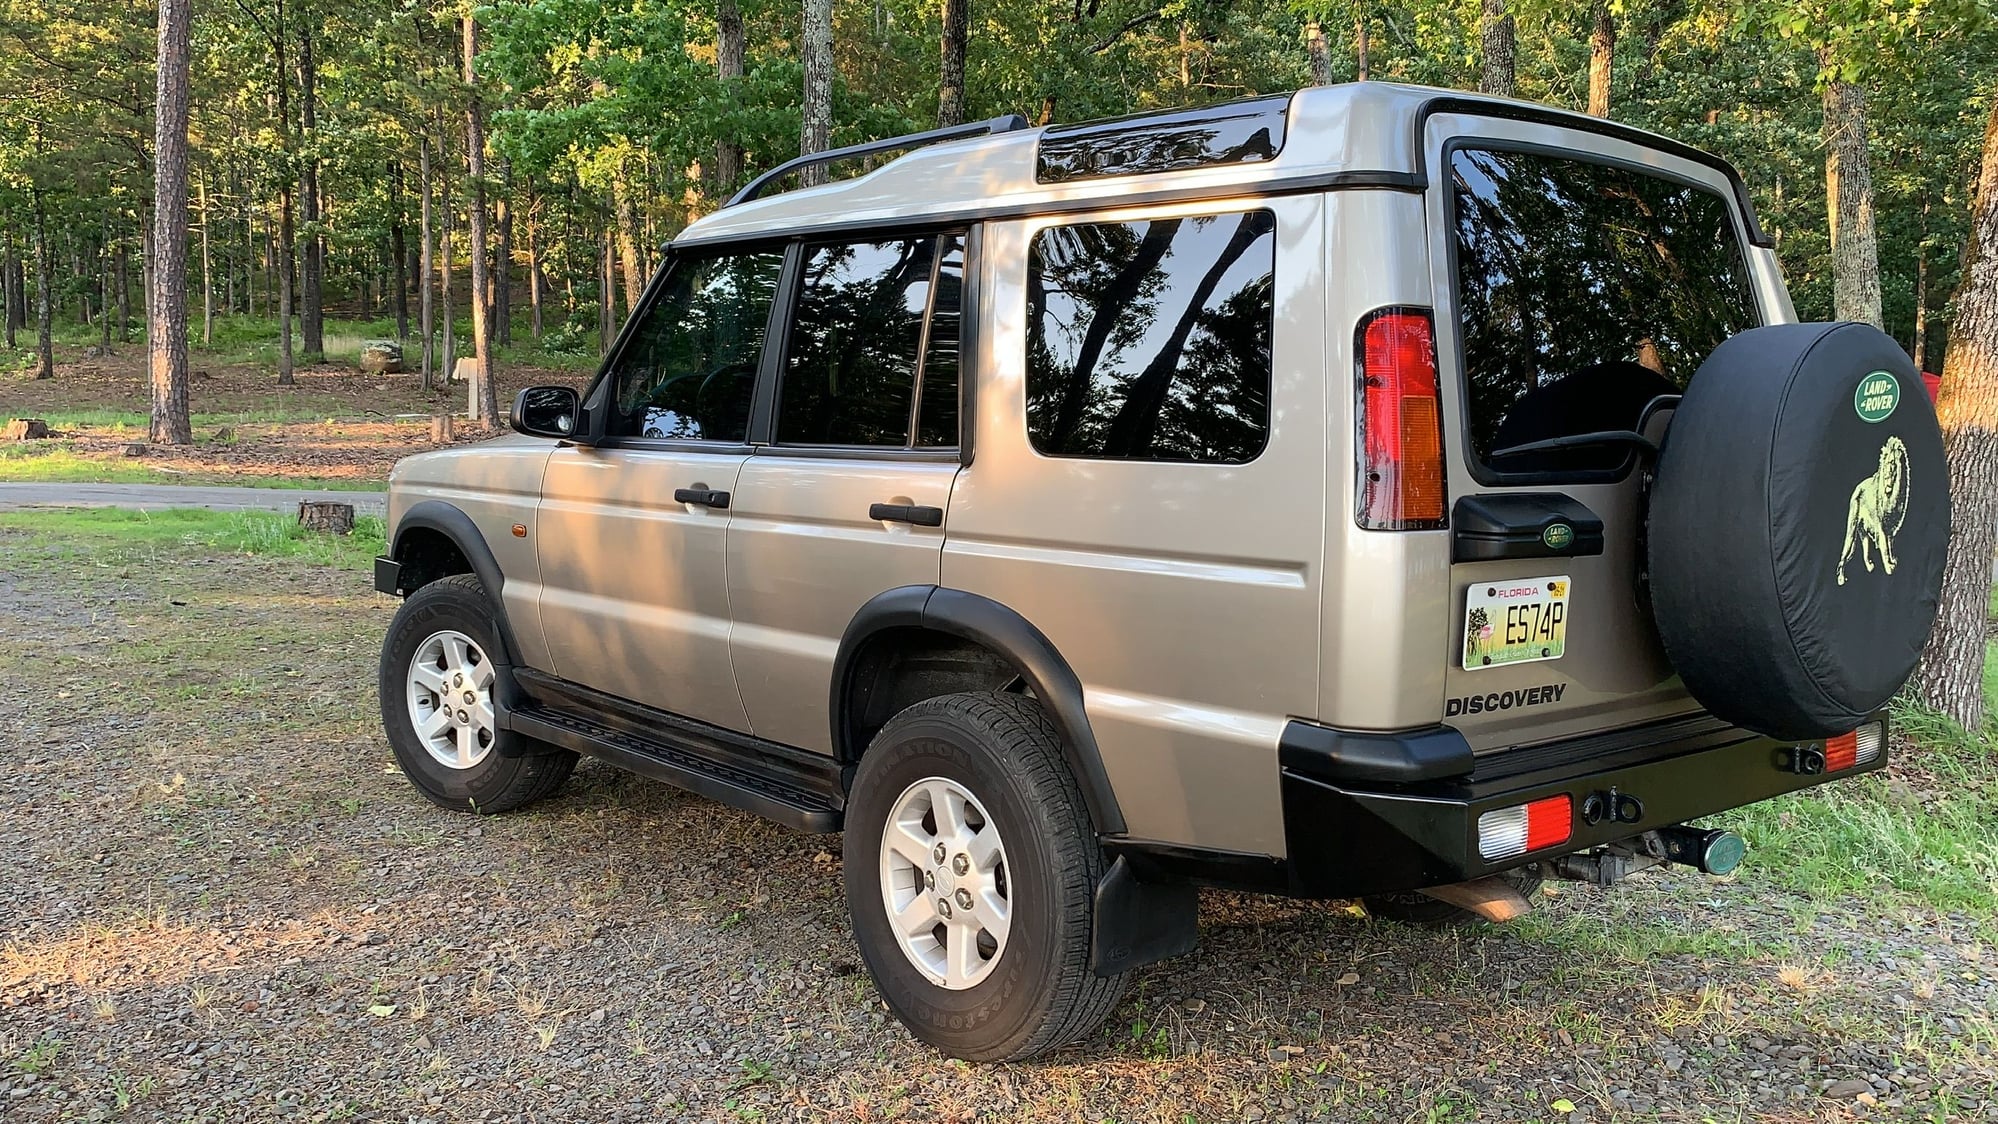 2004 Land Rover Discovery - 2003 Land Rover Discovery 2 "S" Trim  ( NO SUNROOFS ) - Used - VIN SALTL164X3A824938 - 8 cyl - 4WD - Automatic - SUV - Beige - Fairfield Bay, AR 72088, United States